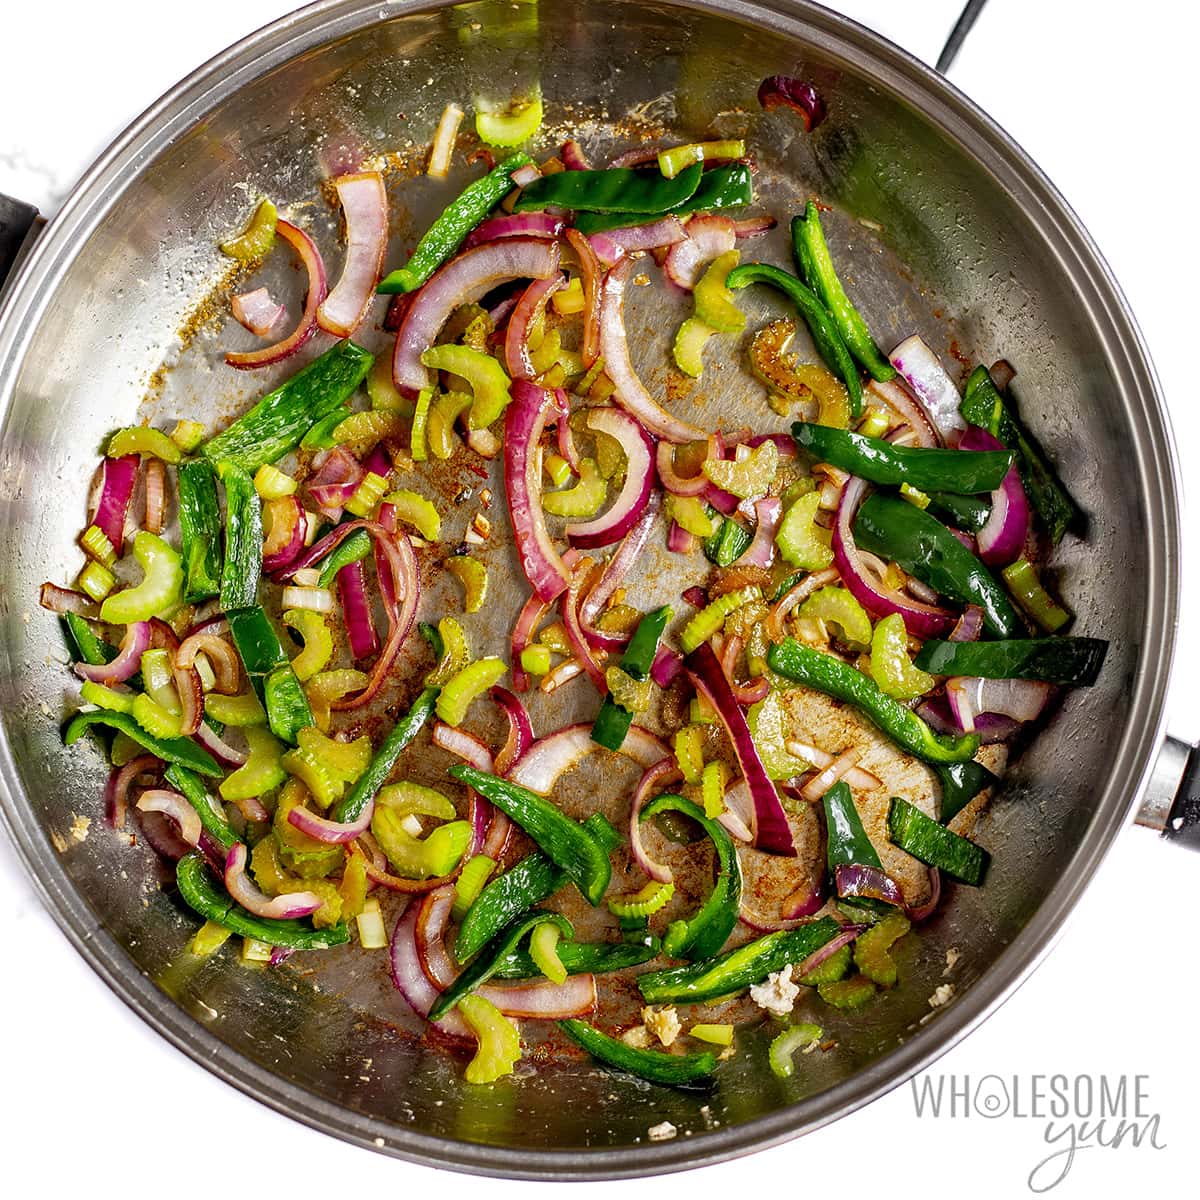 Veggies sauteed in a skillet